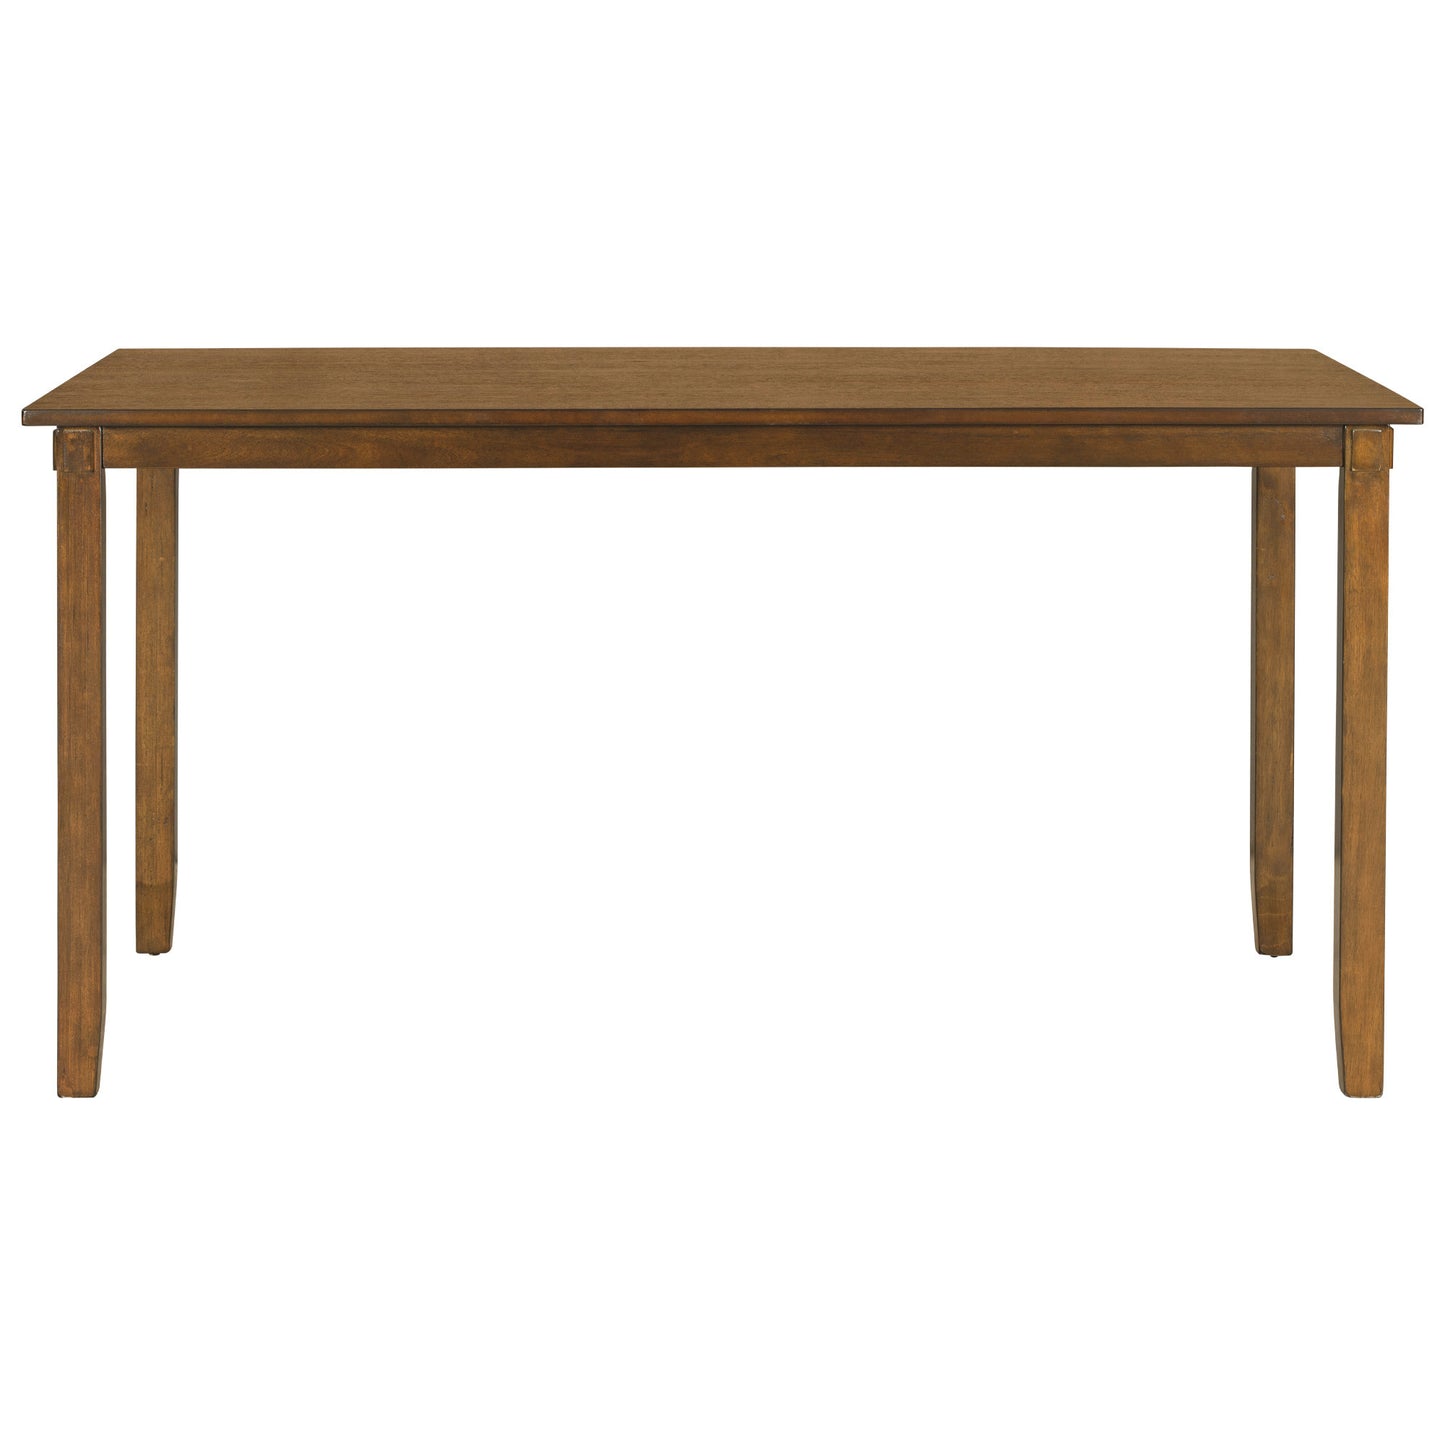 TREXM 6-Piece Kitchen Dining Table Set Natural Cherry